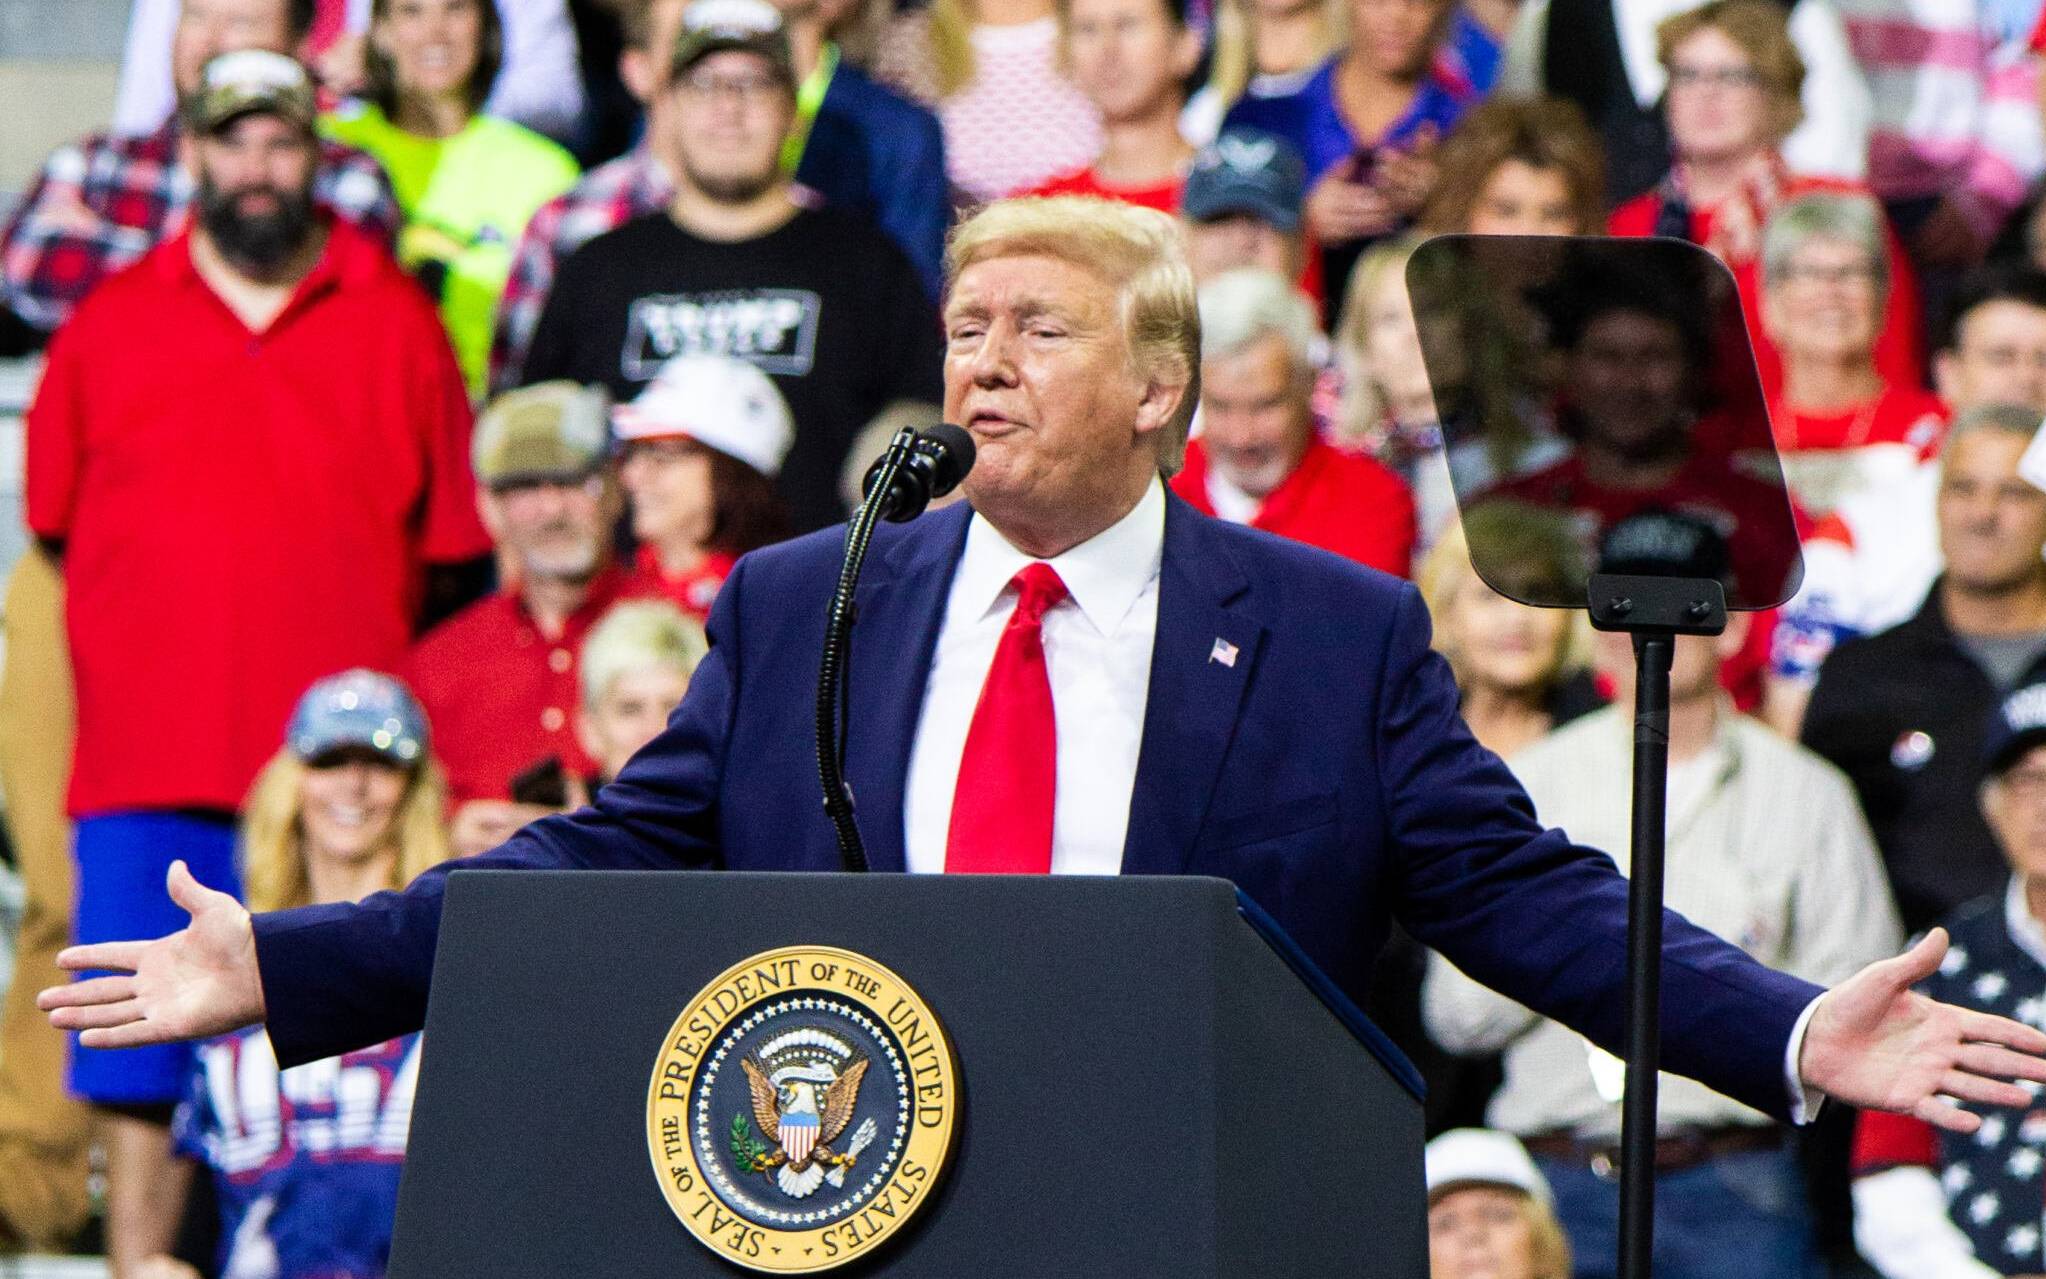 President Donald Trump addresses the crowd at Target Center in Minneapolis, MN, for his 2020 presidential campaign rally on October 10, 2019. Photo by Nikolas Liepins.